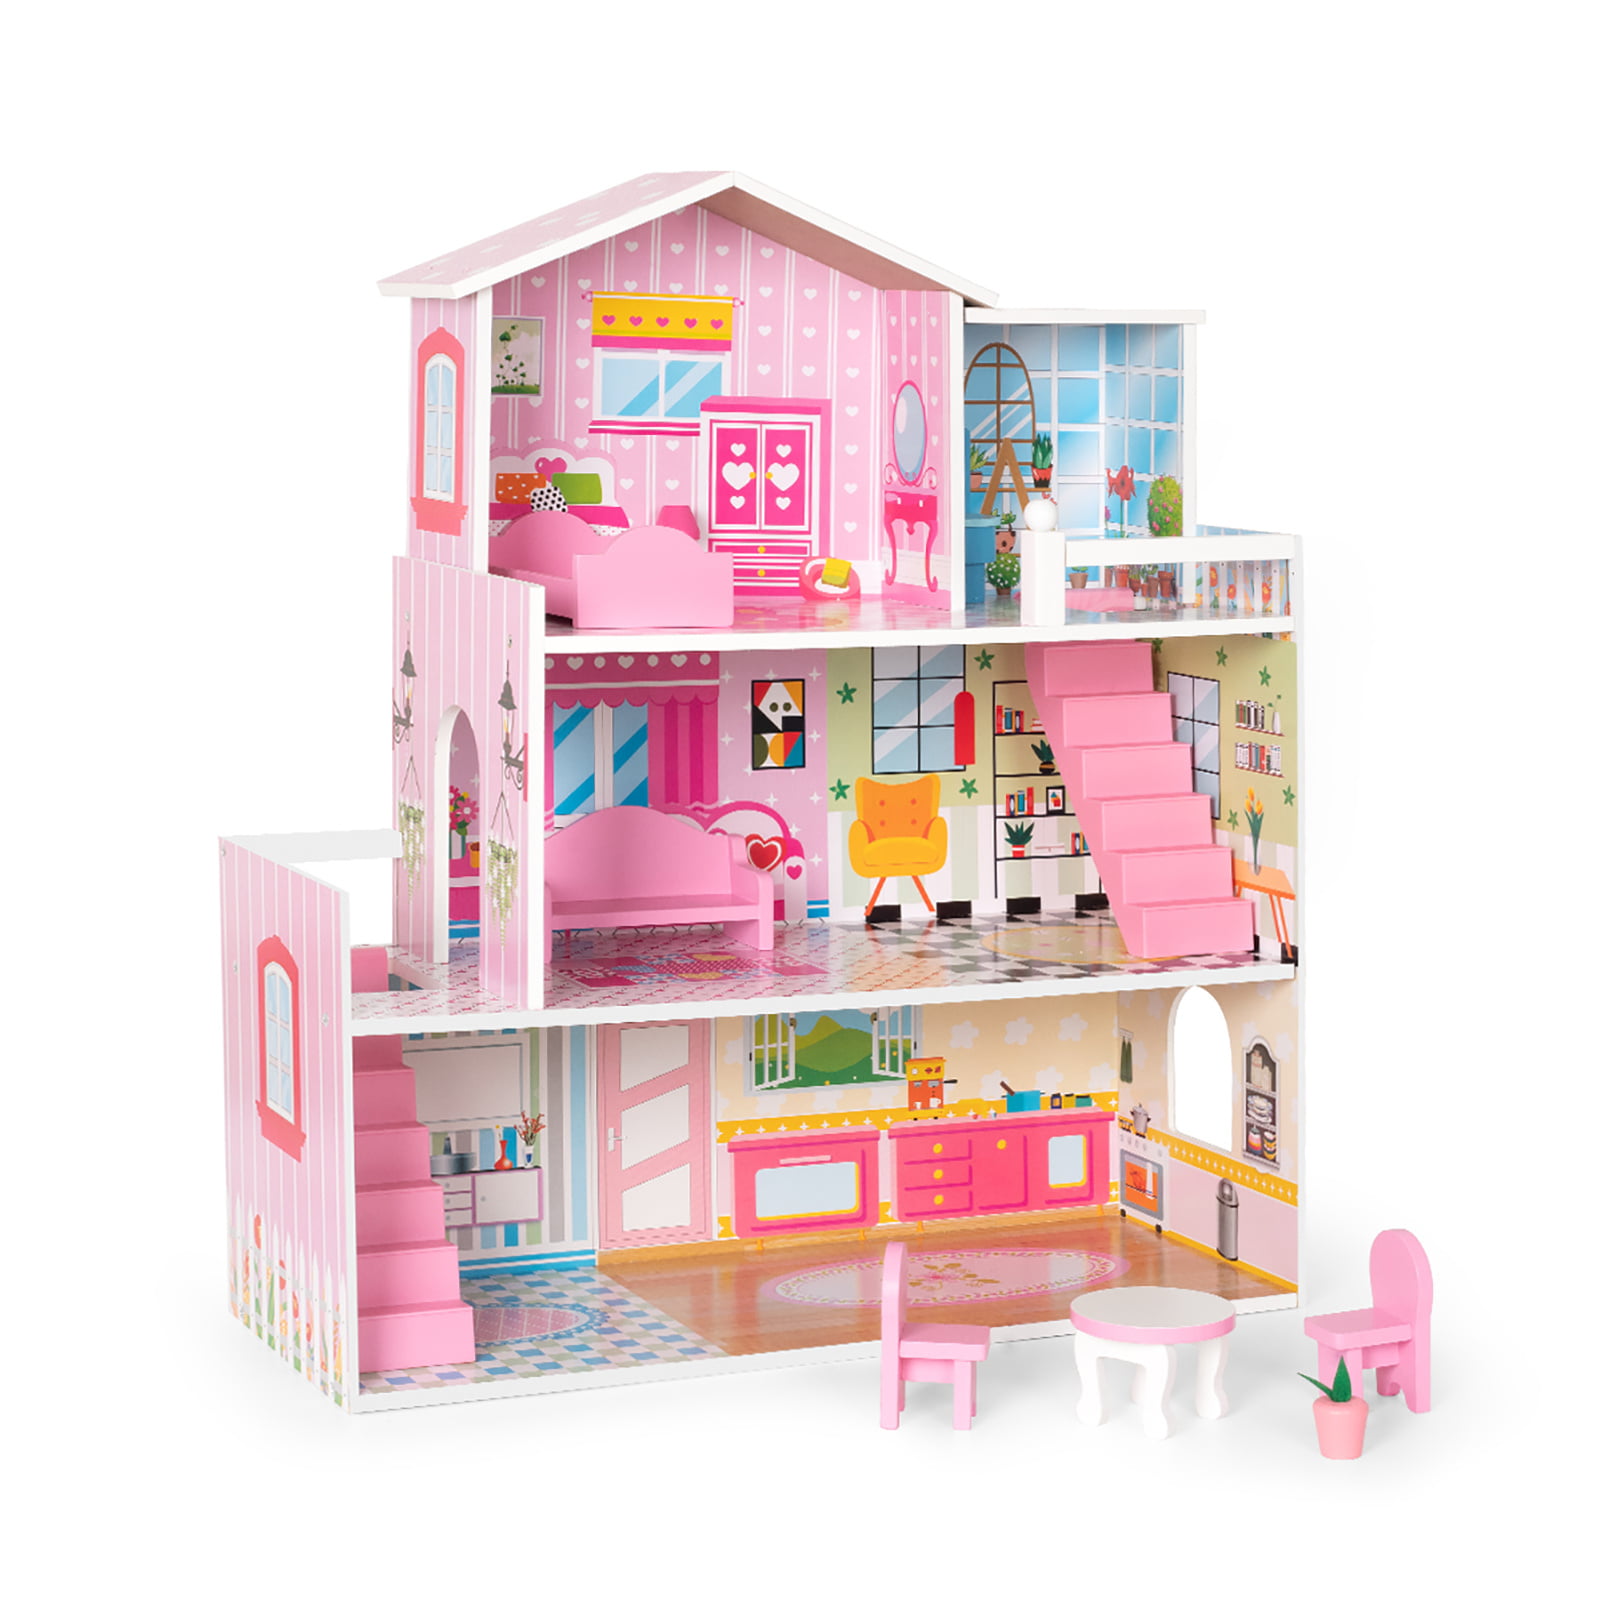 DIY Creative Doll House with Furniture Full Set Miniature Wooden Romantic Pink